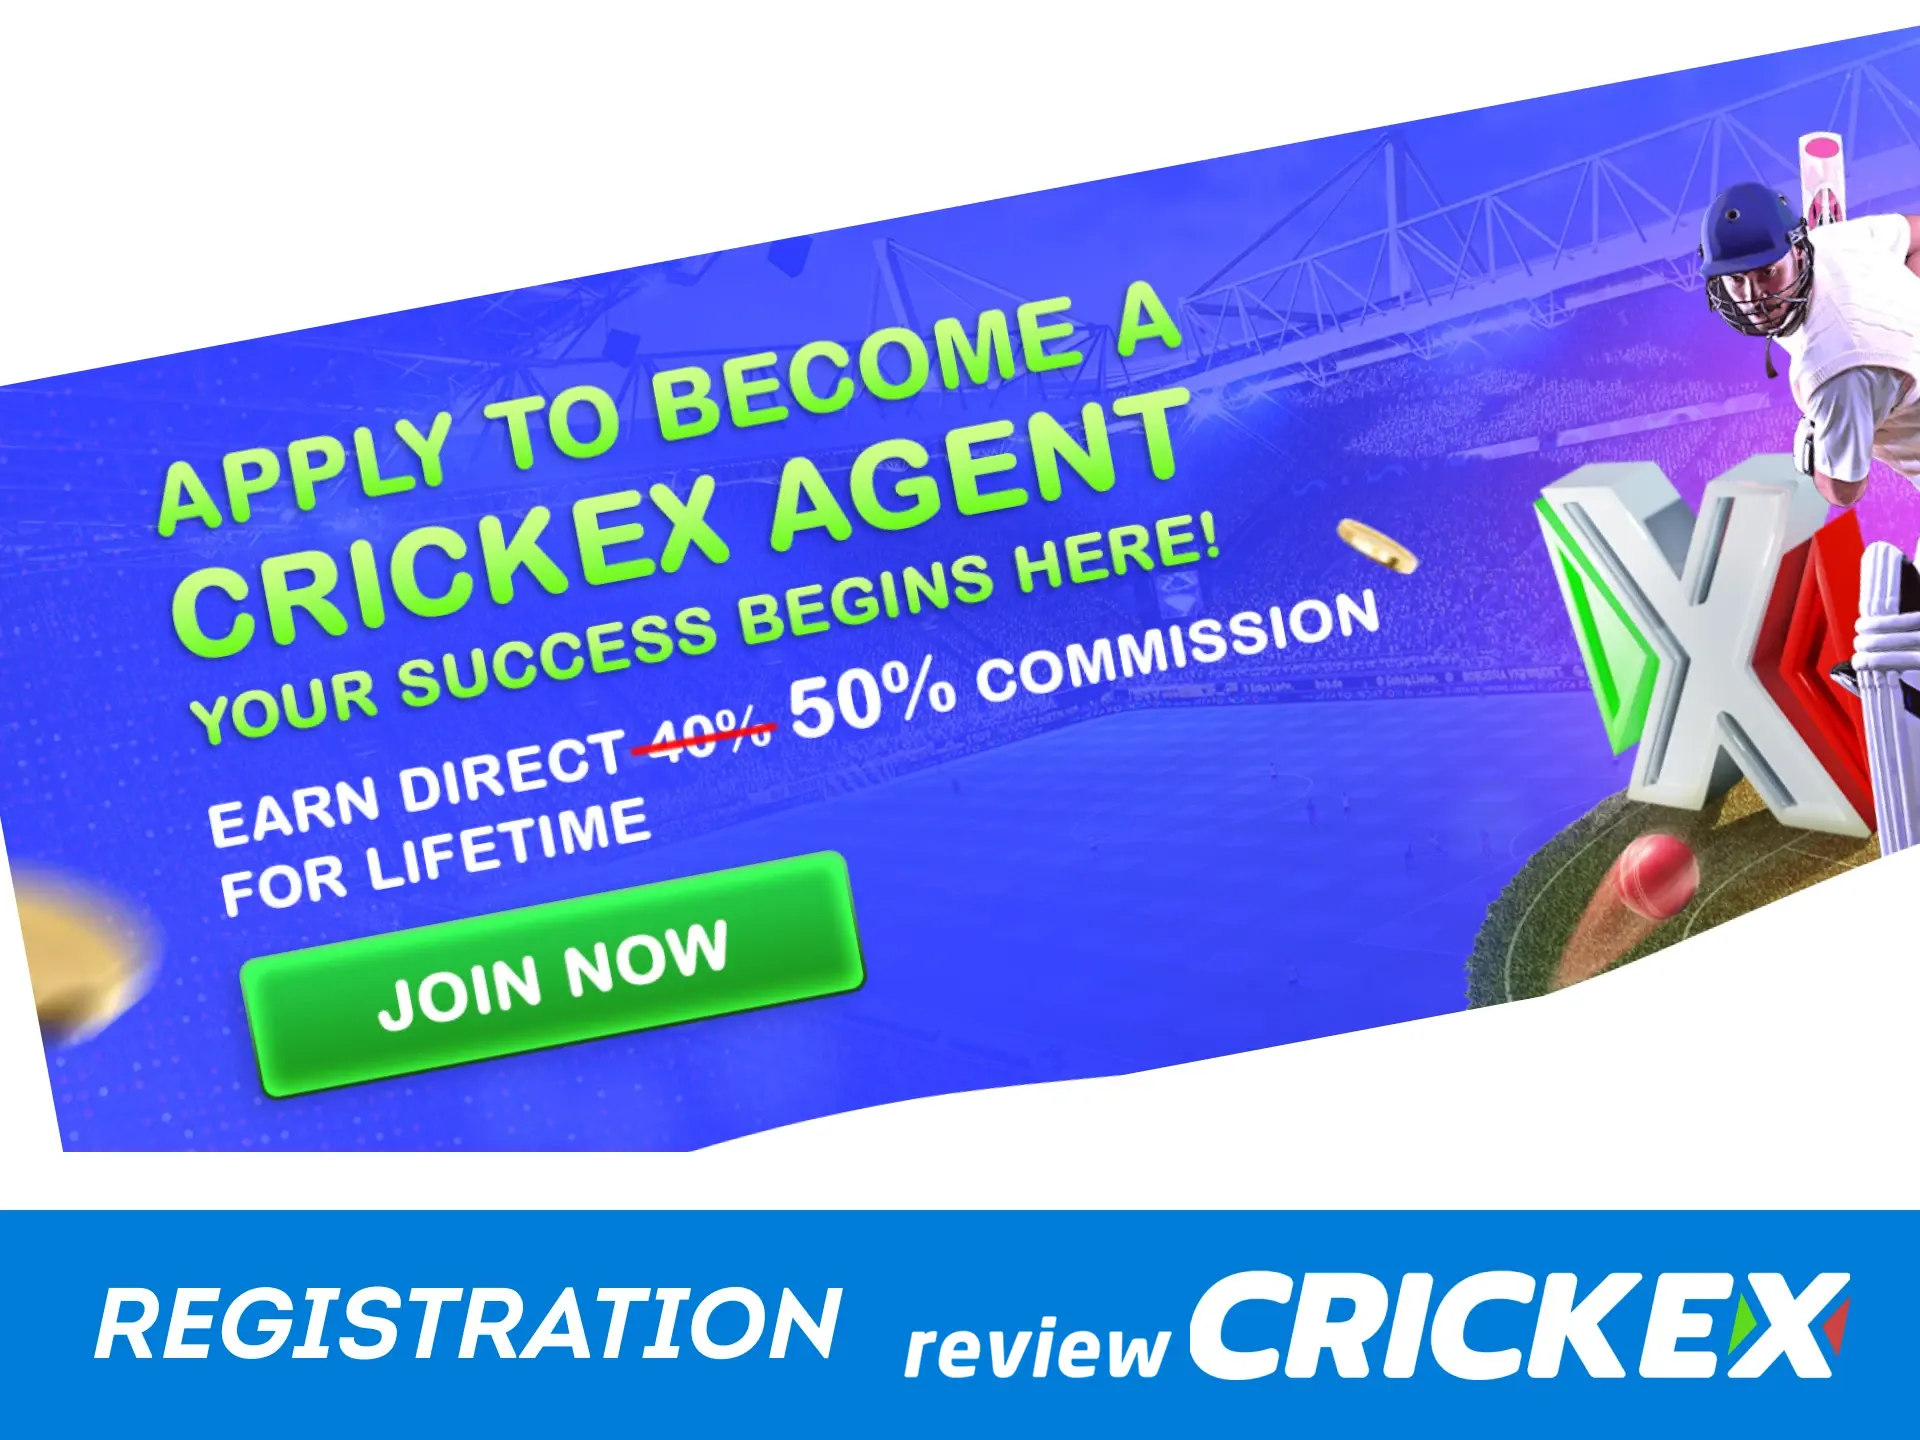 Learn how to sign up for the Crickex affiliate program.